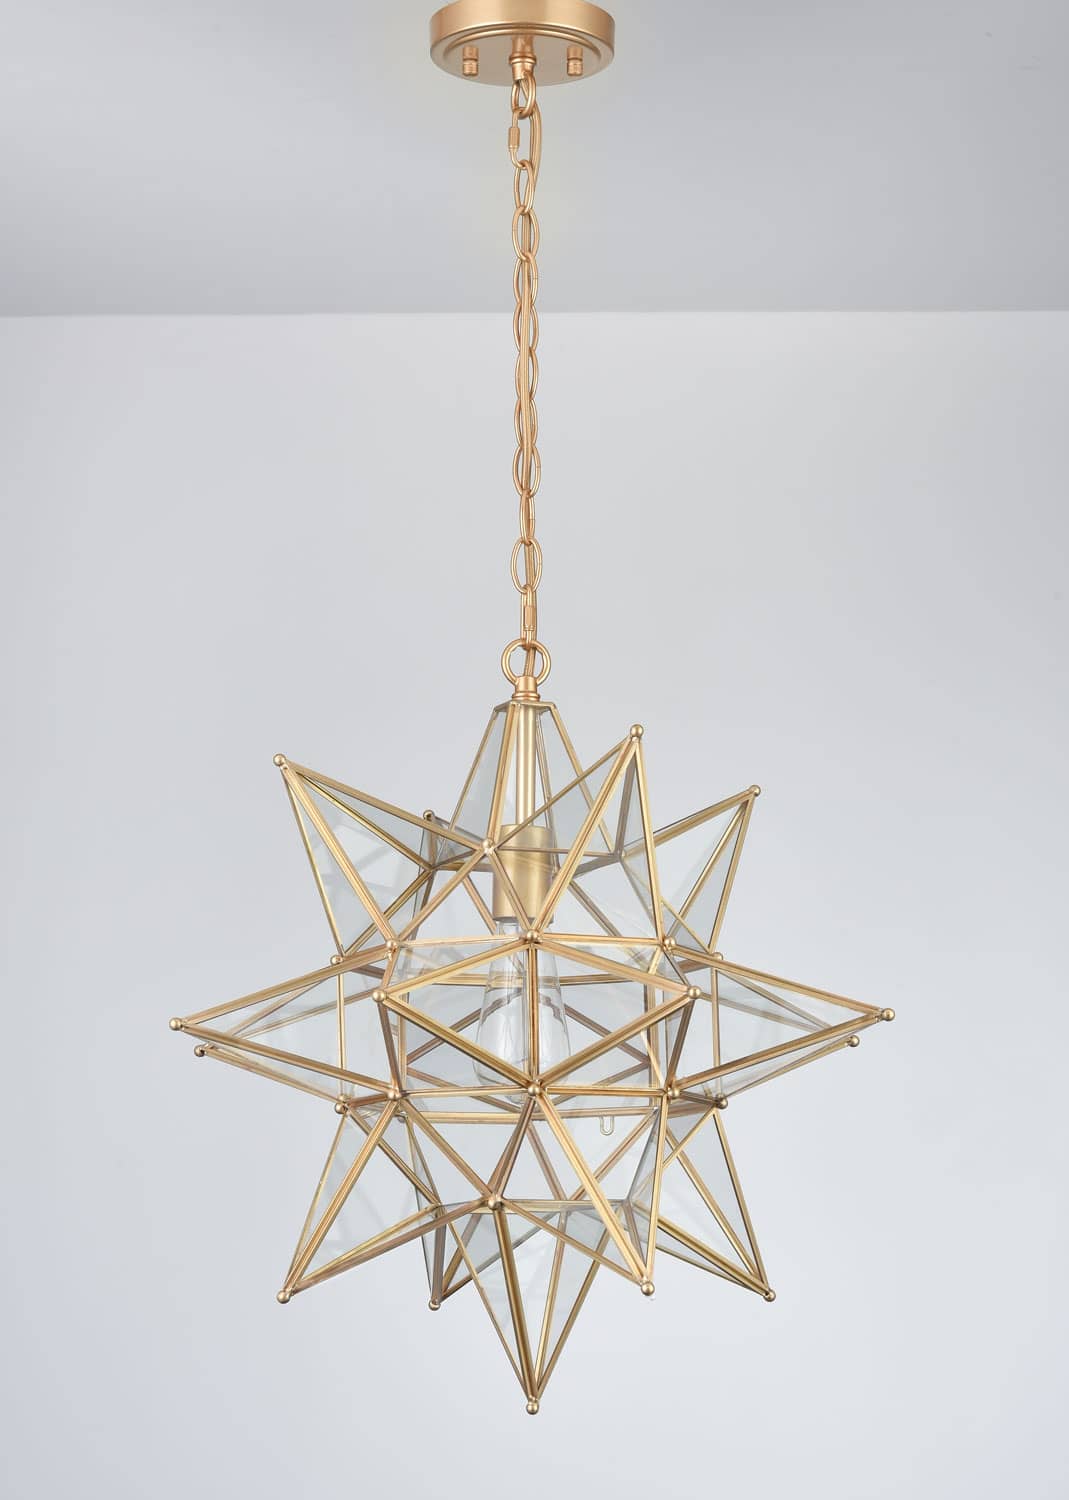 Modern Star Pendant Light Boho Gold Hanging Ceiling Light with Clear Glass